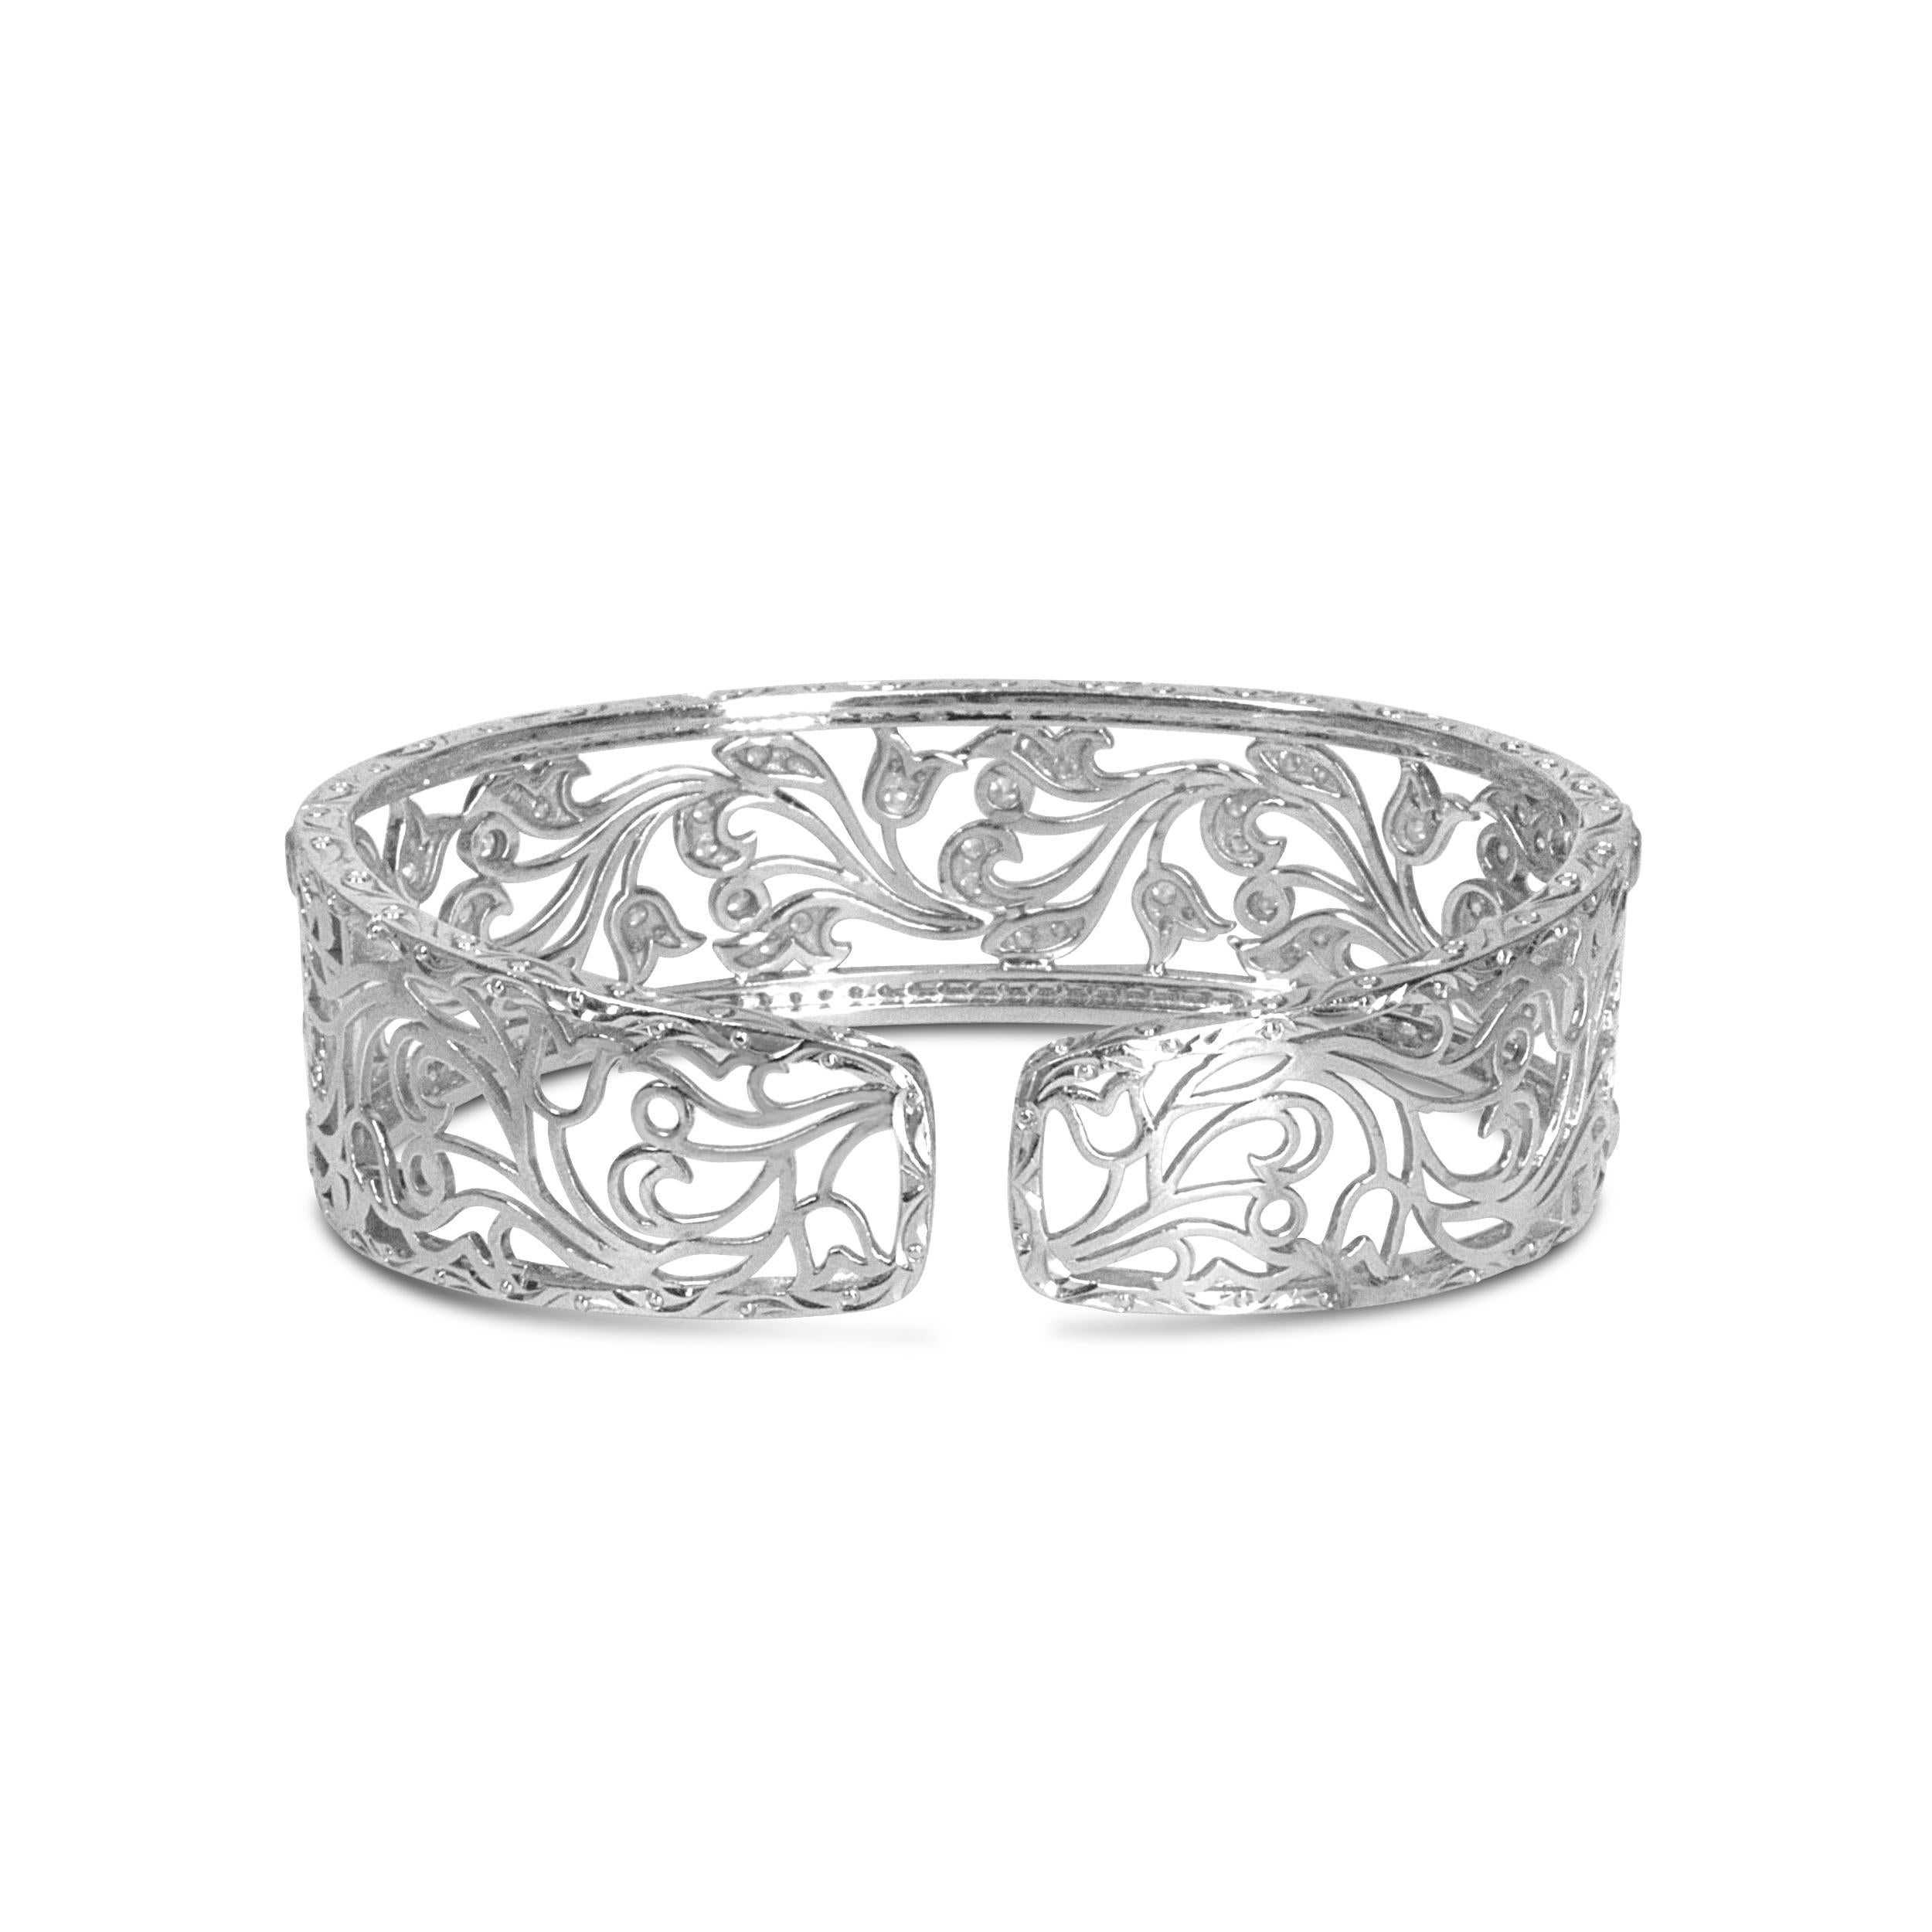 This resplendent openwork bangle cuff is a showpiece with 164 round white diamonds in an elegance-enhancing pave setting. A magnificent openwork floral filigree swirl design makes this piece of jewelry stunning, and it radiates a luminous sparkle